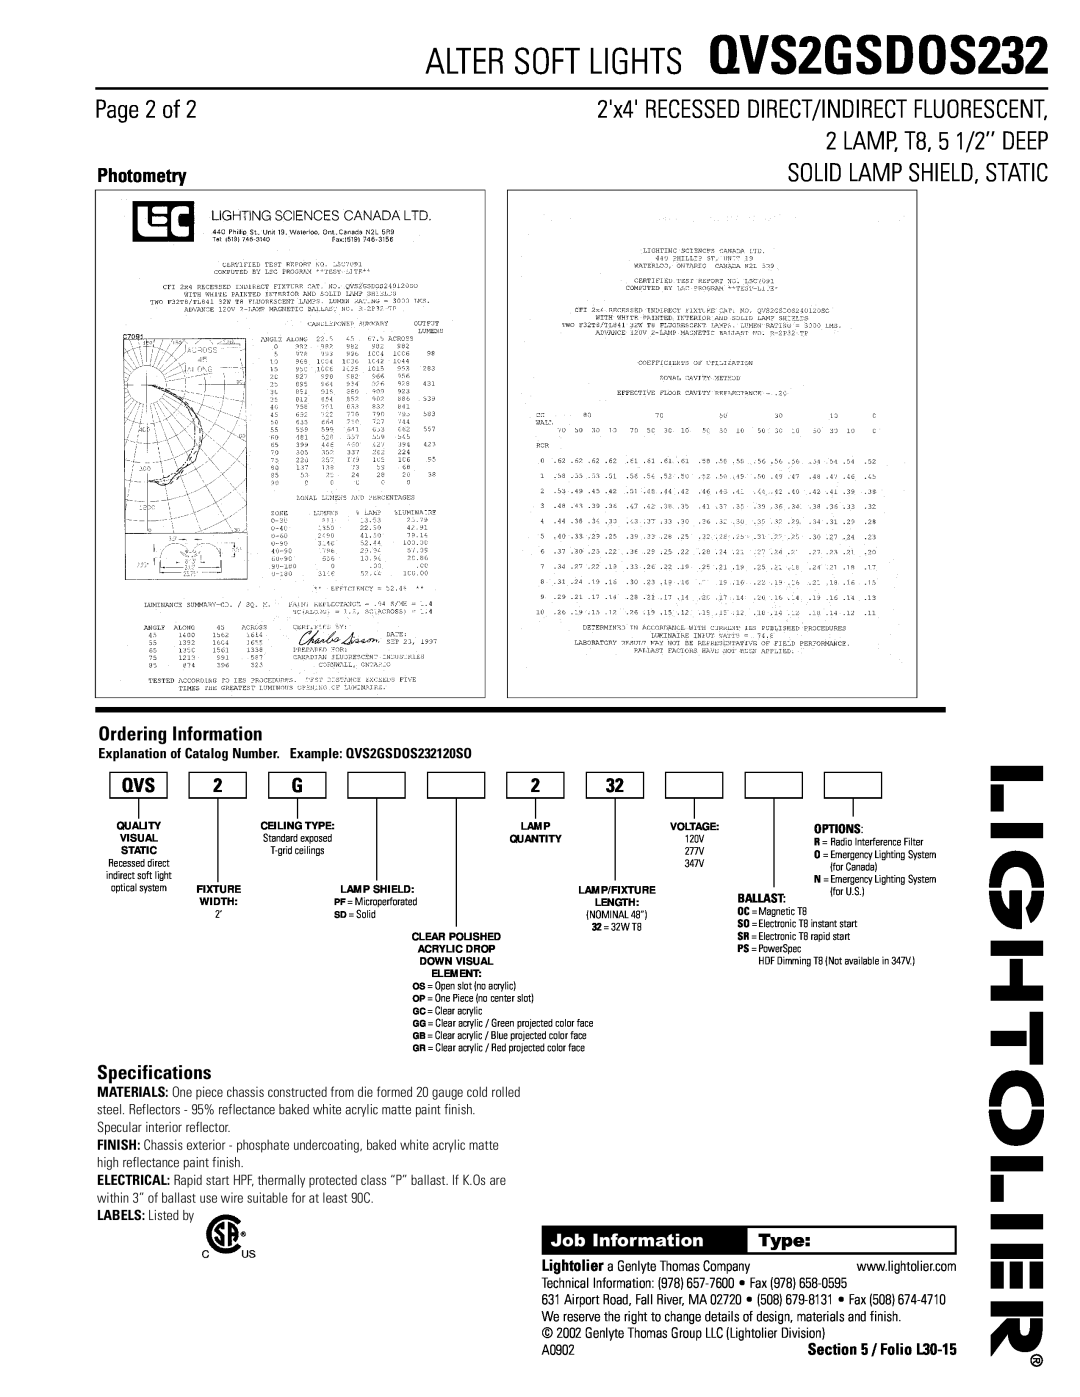 Lightolier Page 2 of, Photometry, Ordering Information, Specifications, ALTER SOFT LIGHTS QVS2GSDOS232, Job Information 